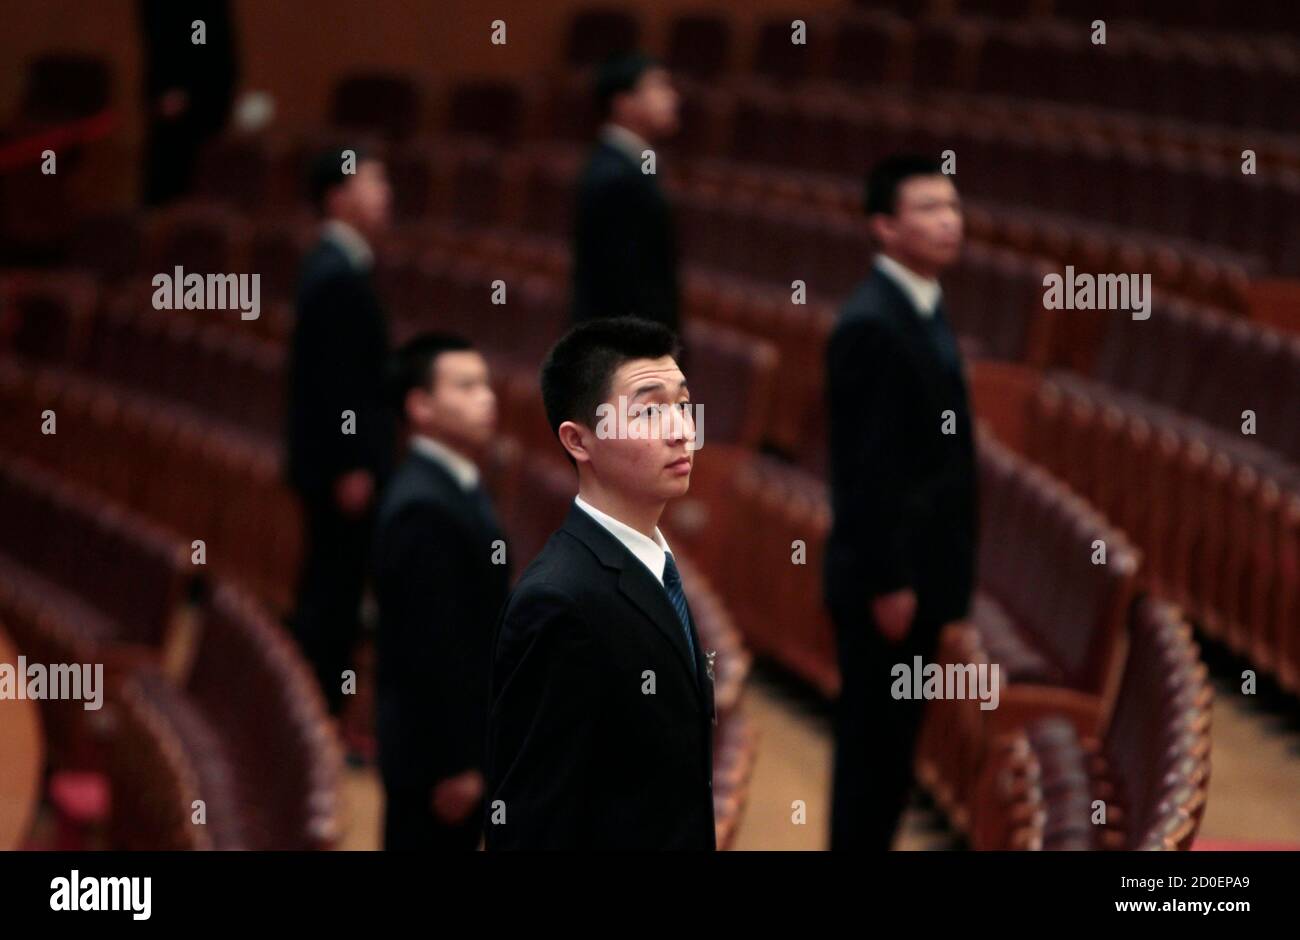 Security officers stand guard during the second plenary meeting of the National People's Congress (NPC), China's parliament, at the Great Hall of the People in Beijing March 8, 2012. China's parliament unveiled legislation on Thursday to solidify police powers to secretly hold dissidents and other suspects of state security crimes, a year after a spasm of clandestine detentions drew international condemnation. REUTERS/Jason Lee (CHINA - Tags: POLITICS CRIME LAW) Stock Photo